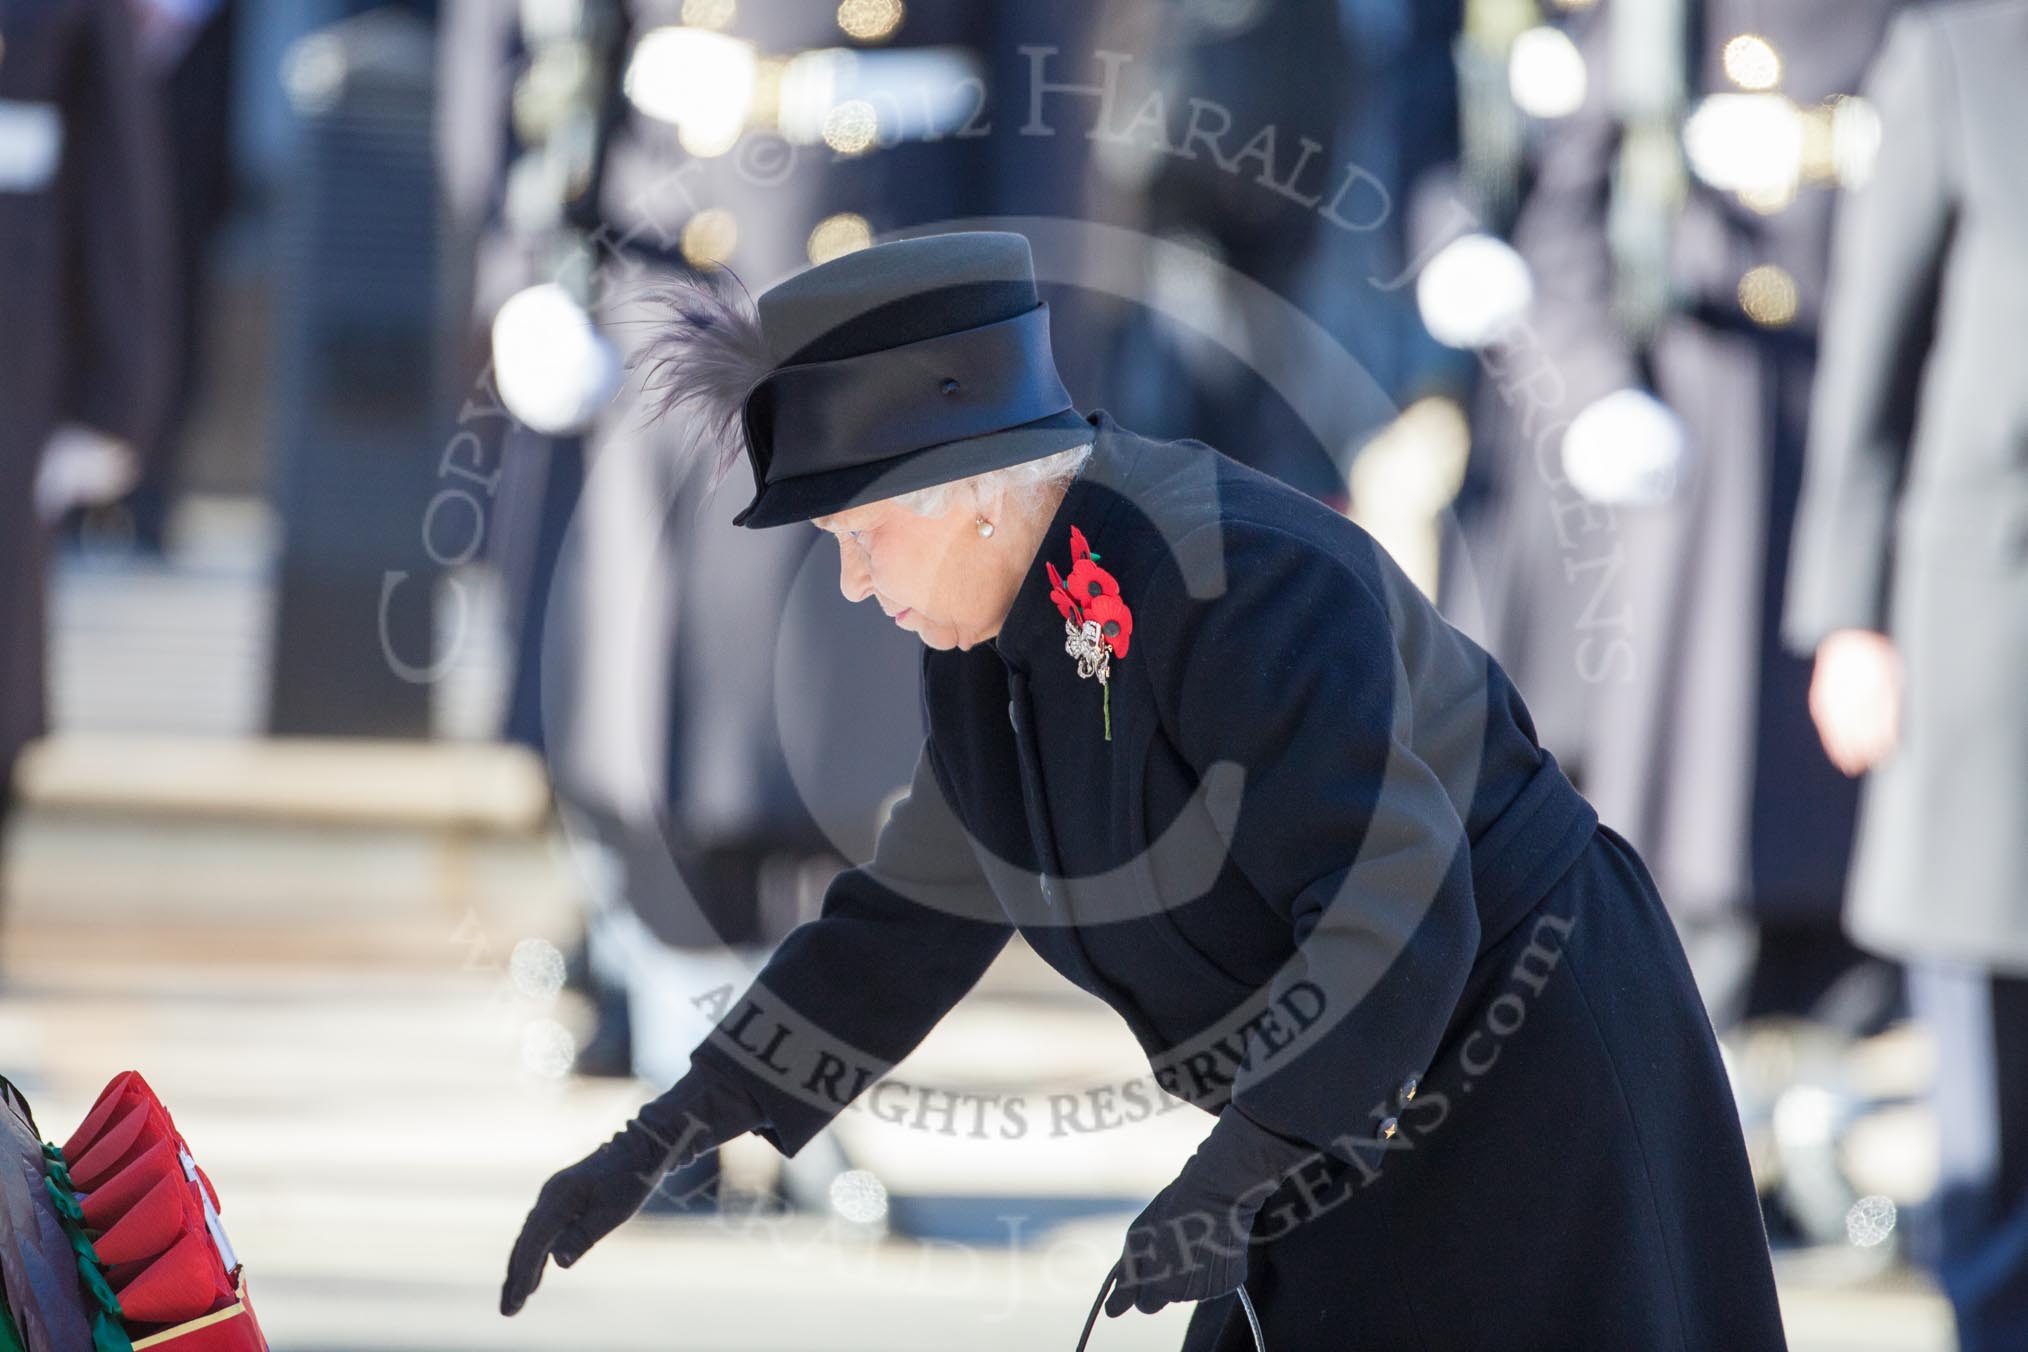 HM The Queen, having laid her wreath at the Cenotaph.